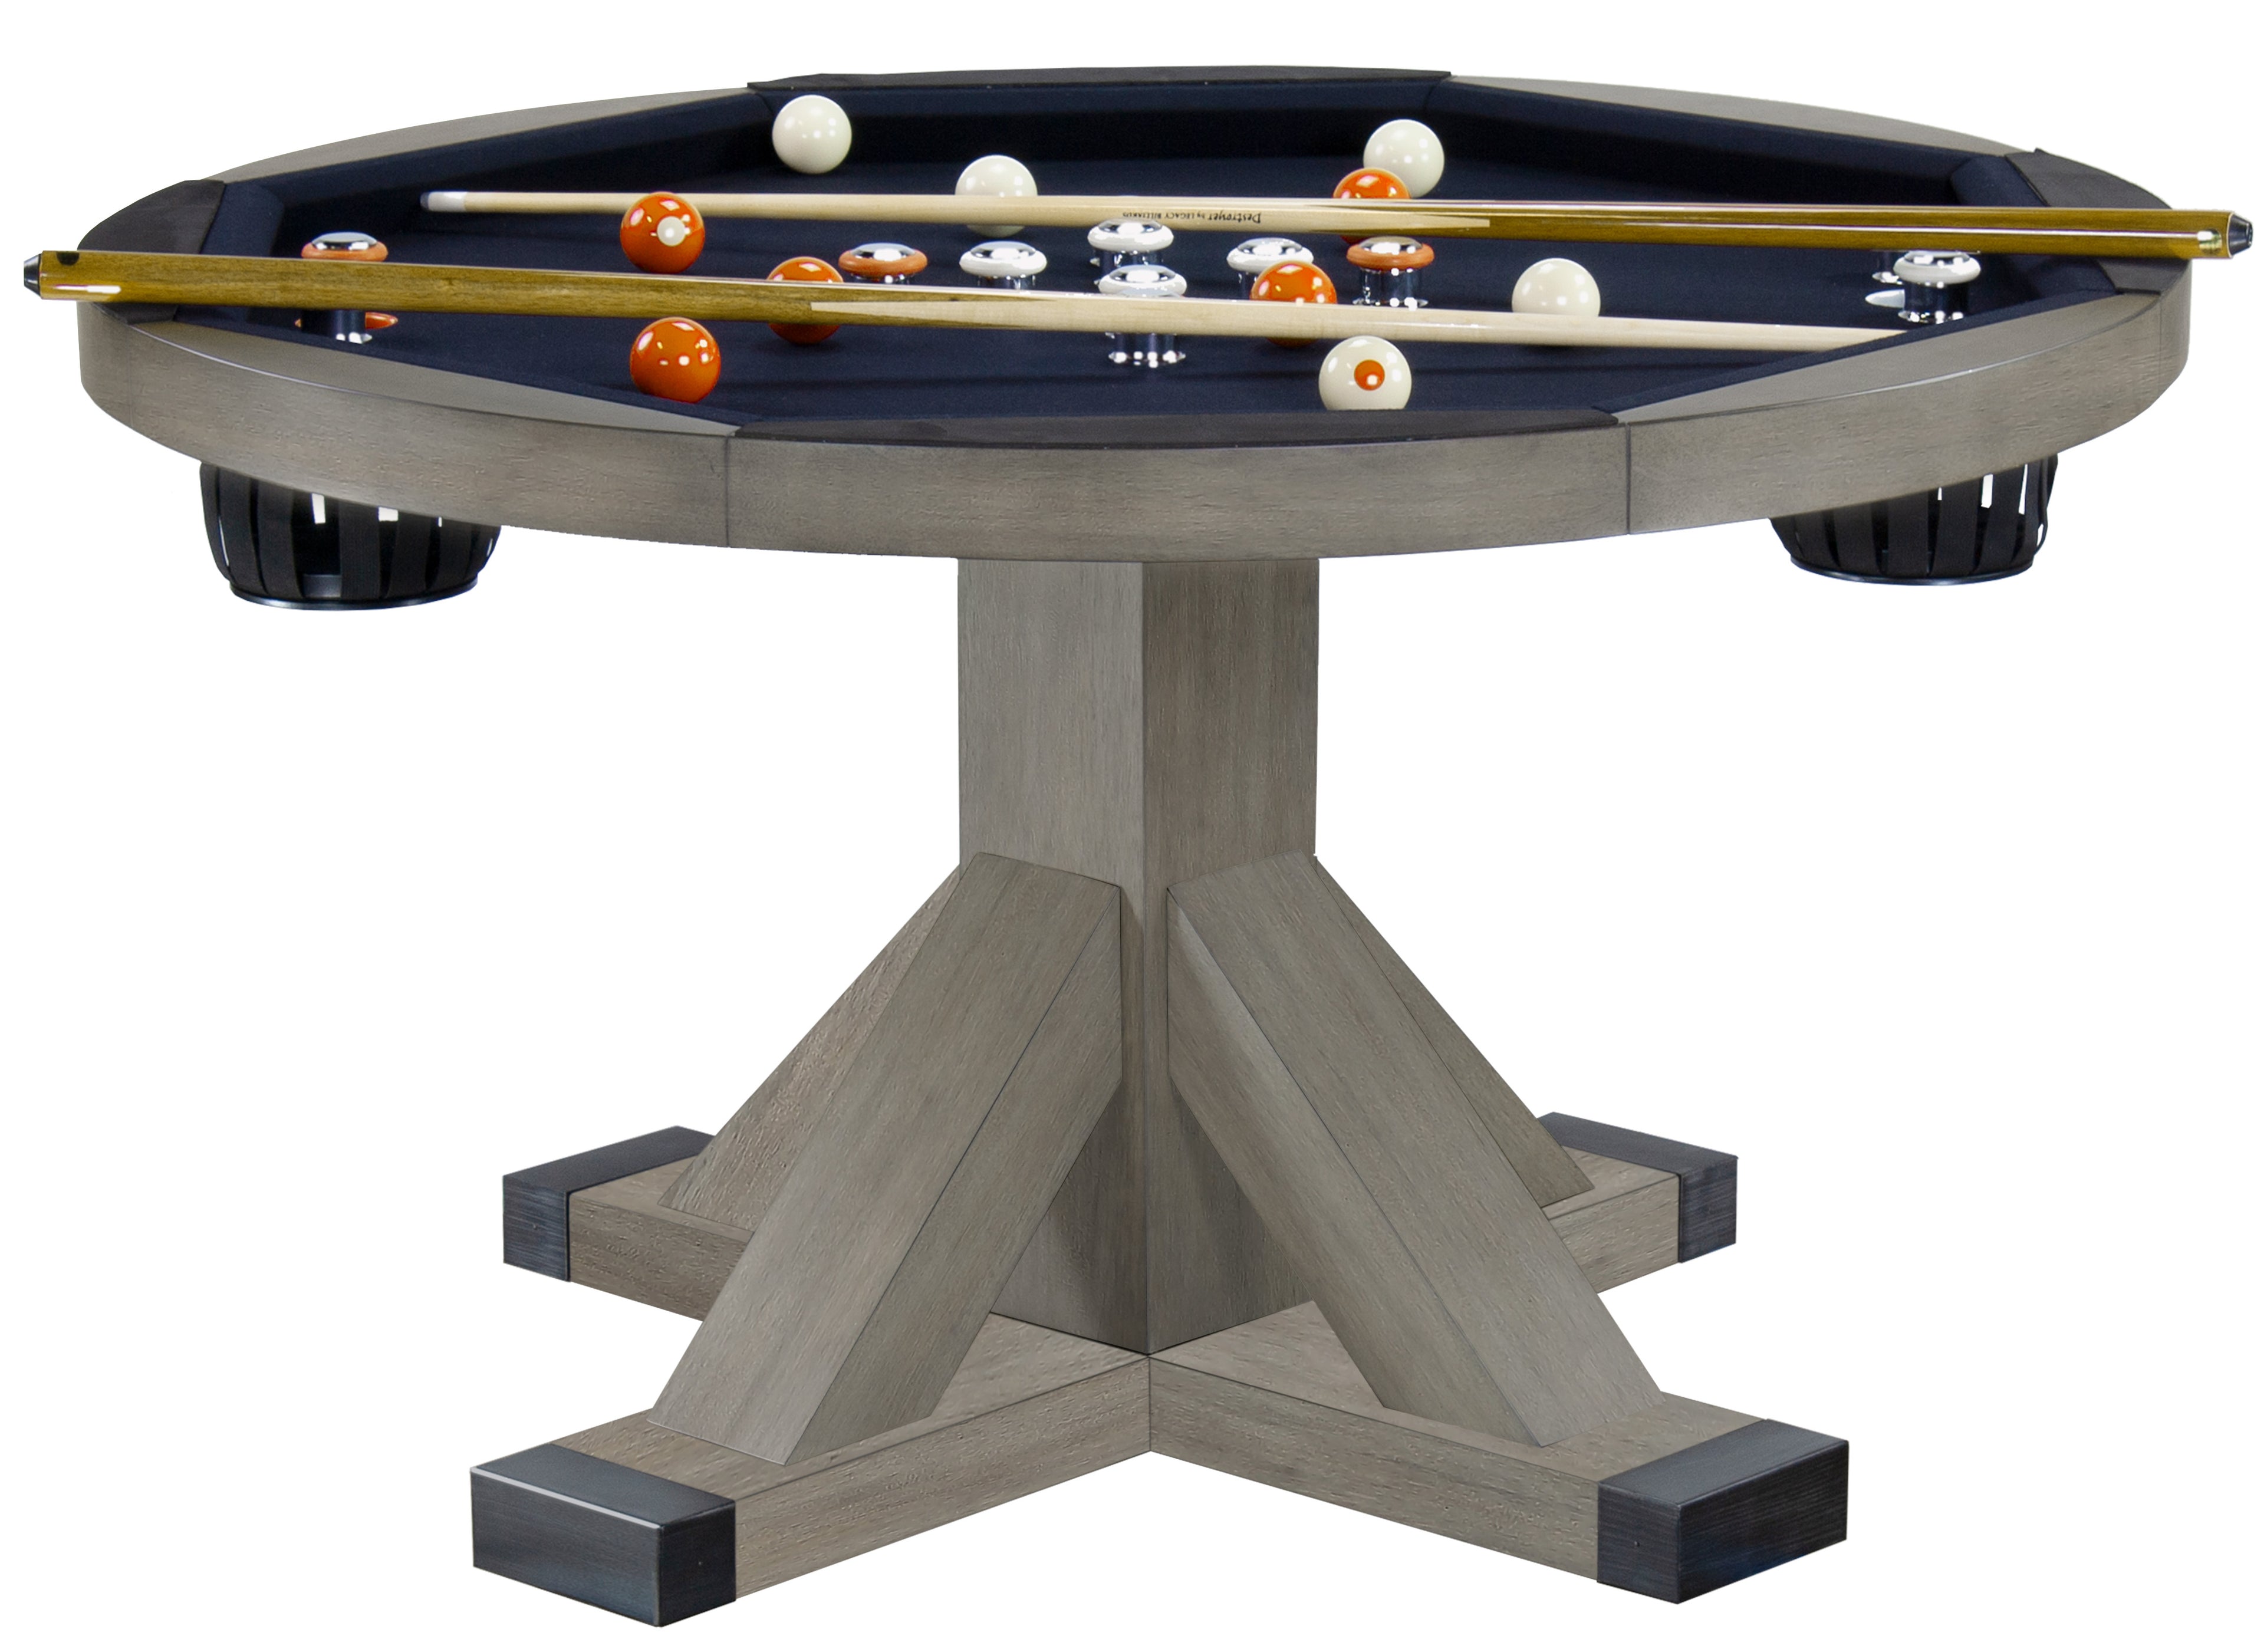 Legacy Billiards Sterling 3 in 1 Game Table with Poker, Dining and Bumper Pool in Overcast Finish - Primary Image